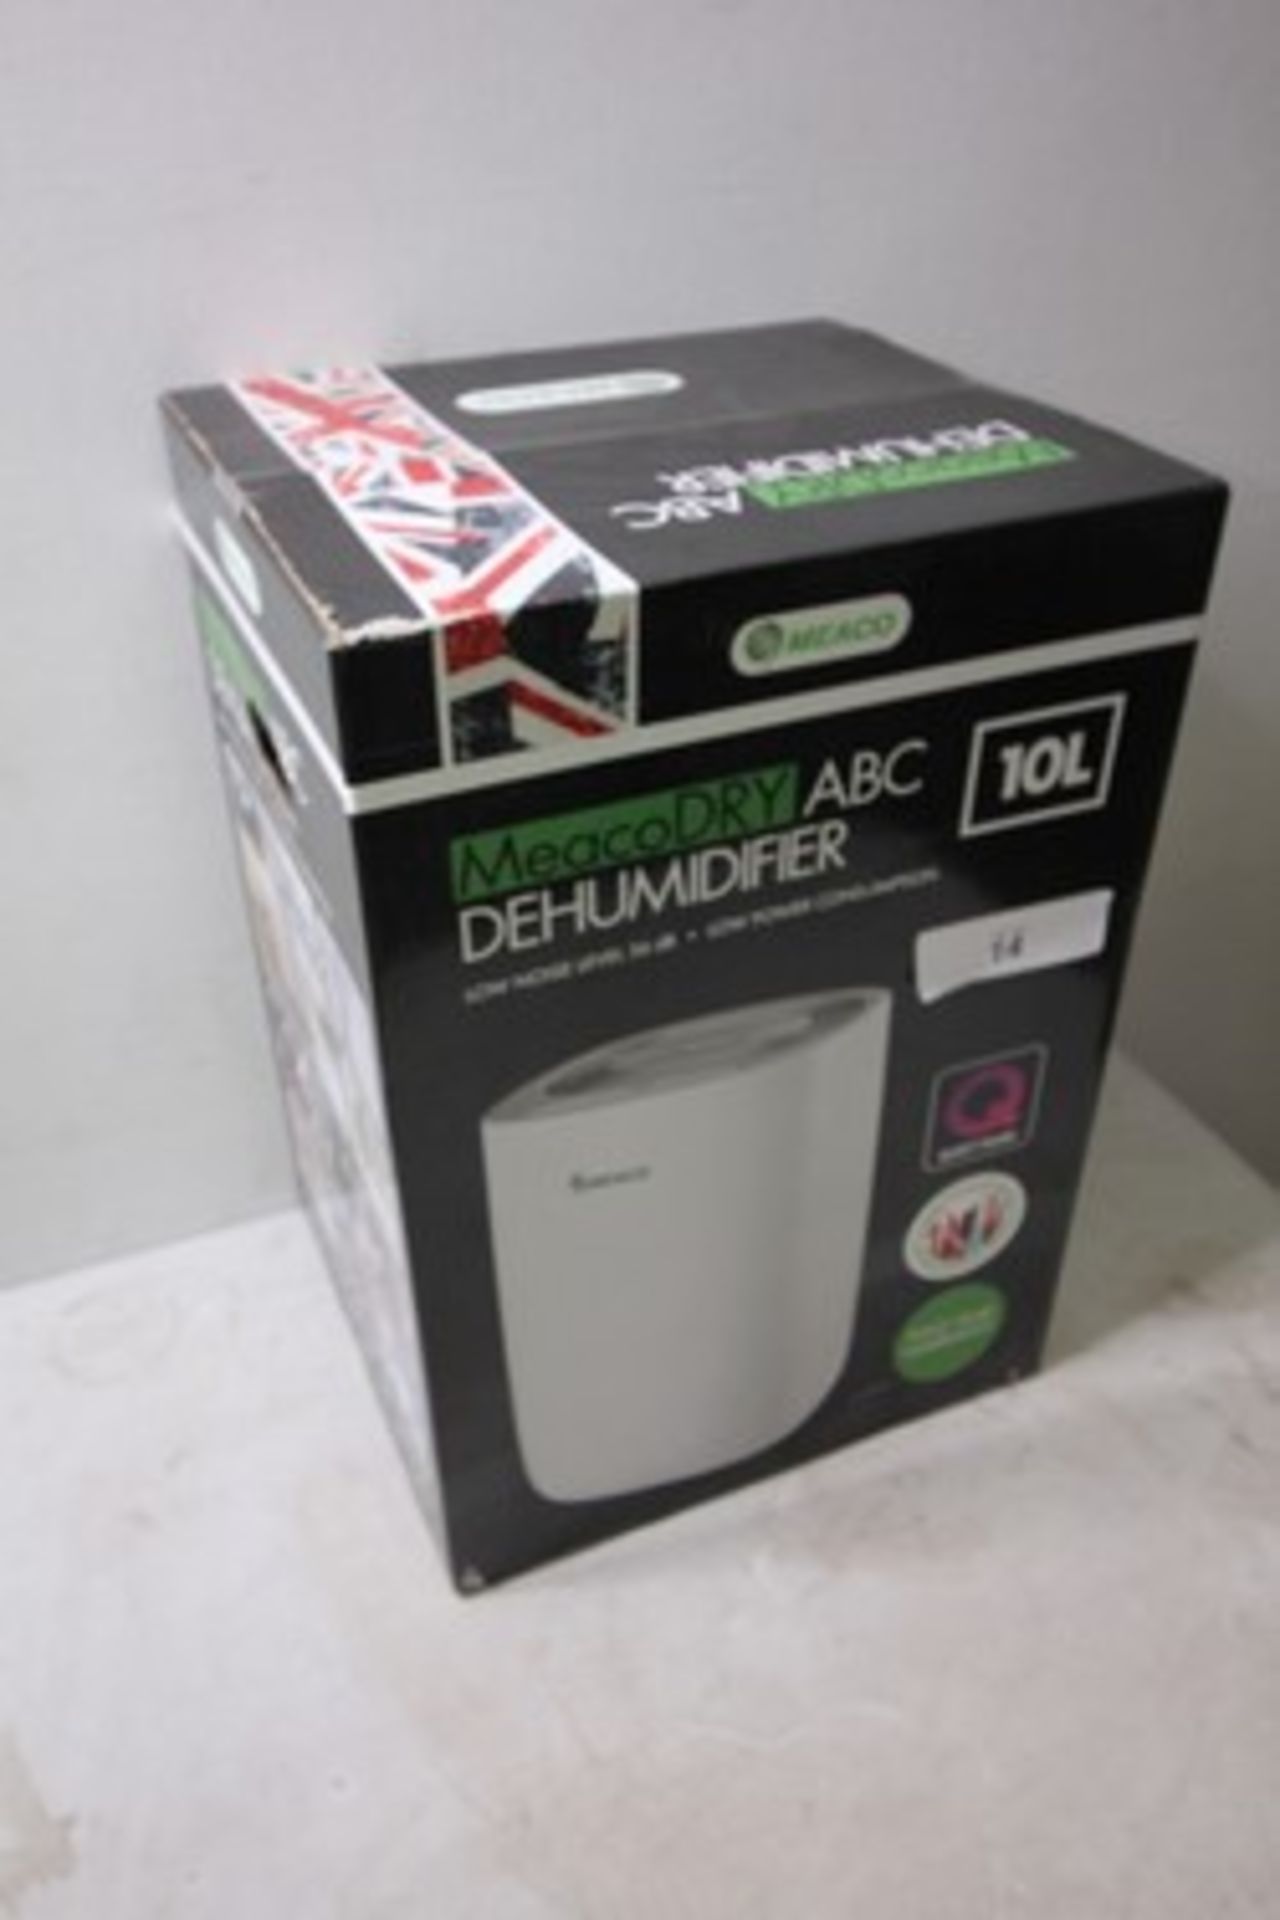 1 x Meaco ABC 10 litre dehumidifier, model MPR221072573225, low noise level 36db - Sealed new in box